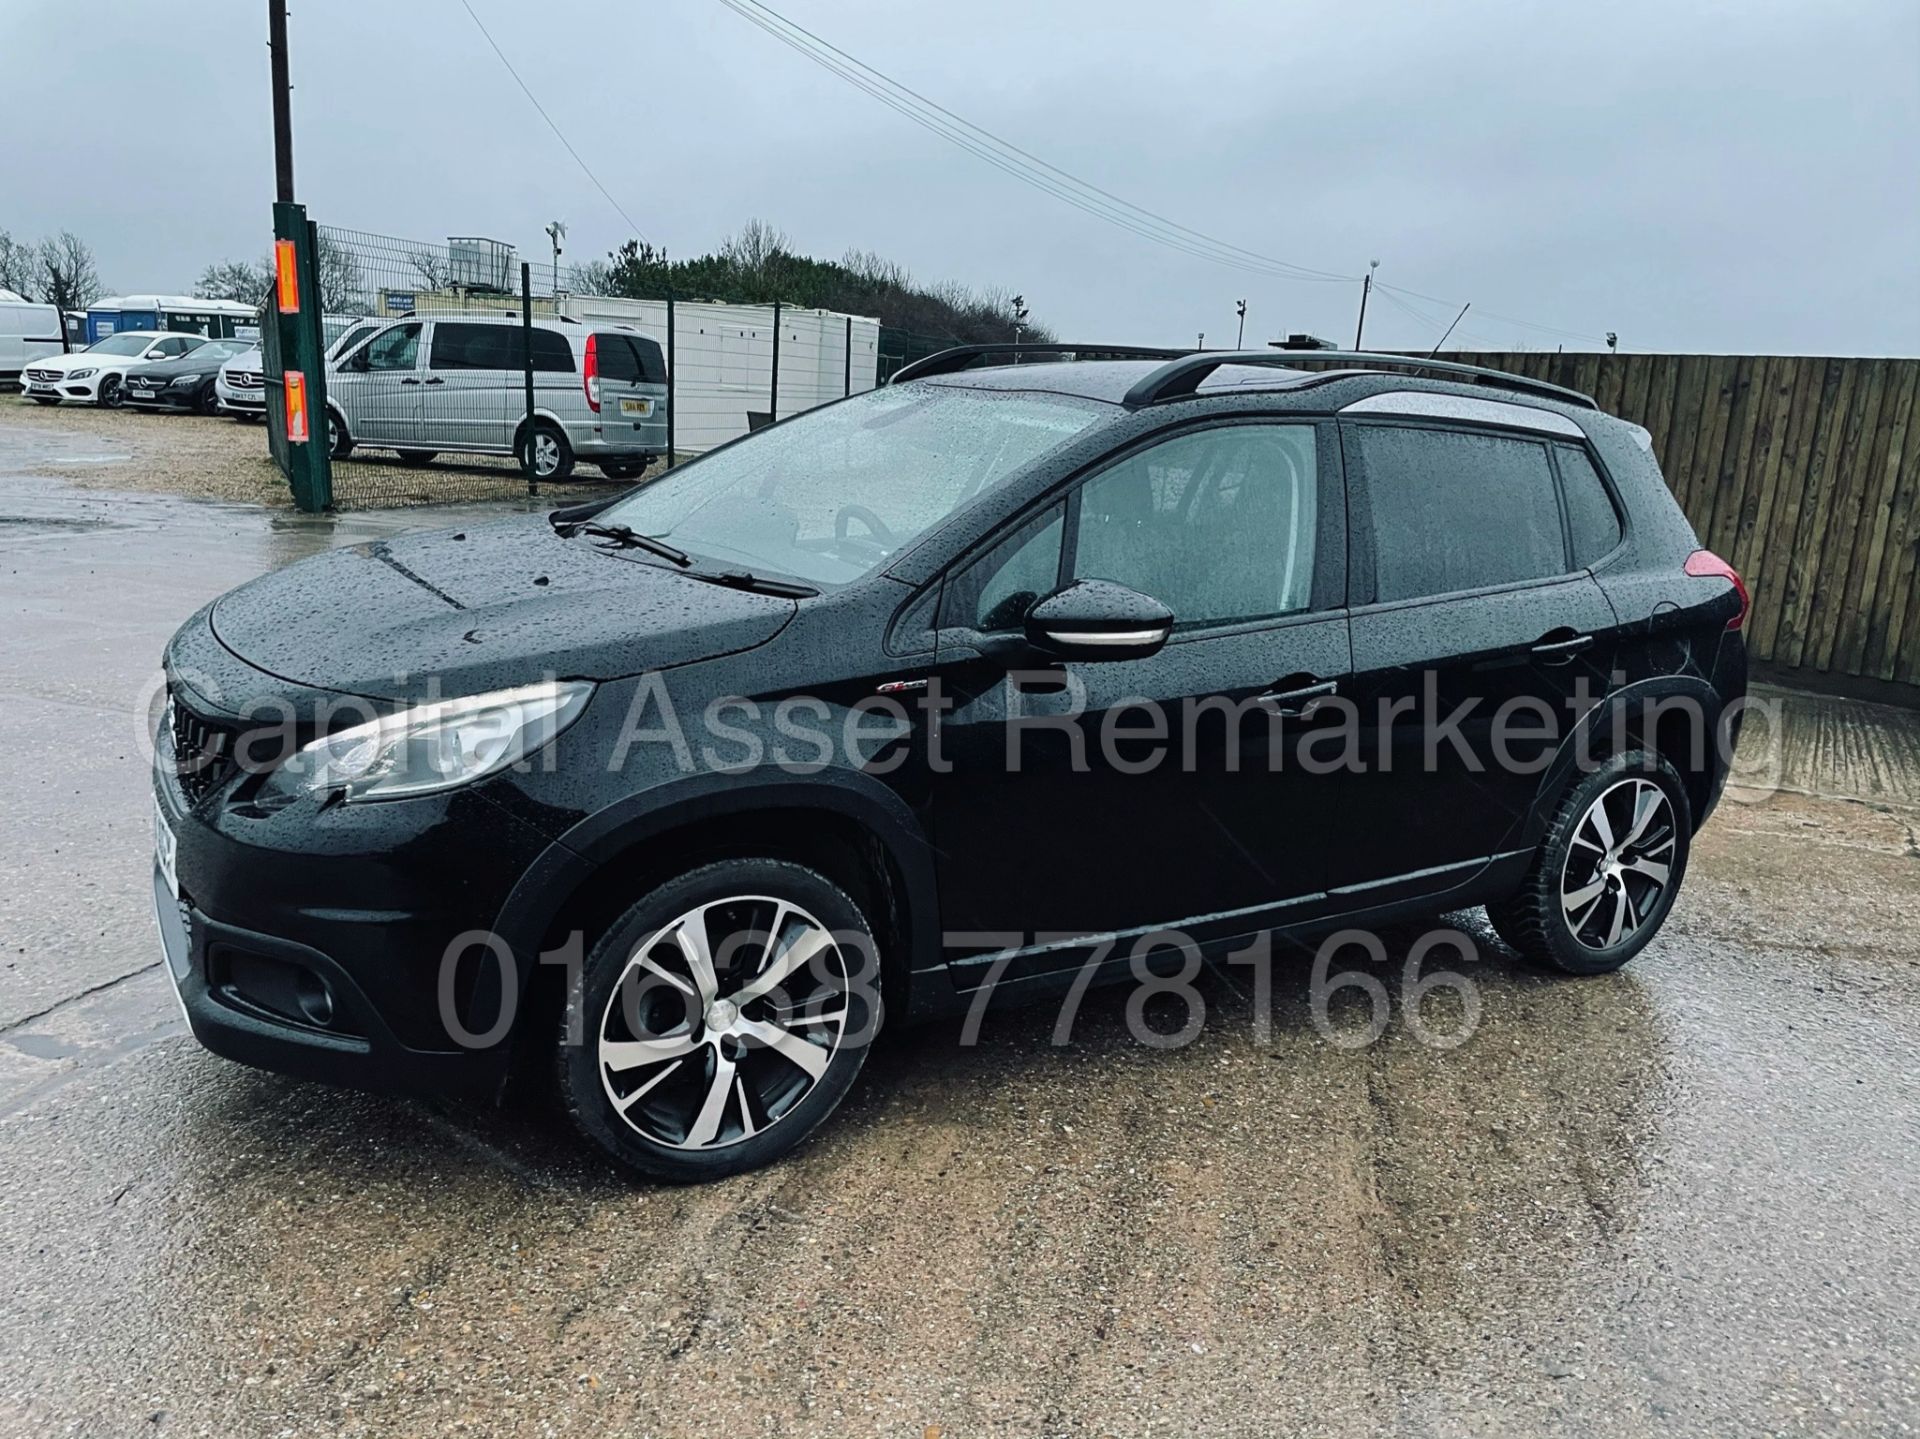 PEUGEOT 2008 *GT LINE* SUV / MPV (2019 - EURO 6) '1.5 BLUE HDI' *SAT NAV - PAN ROOF' *LOW MILES* - Image 7 of 46